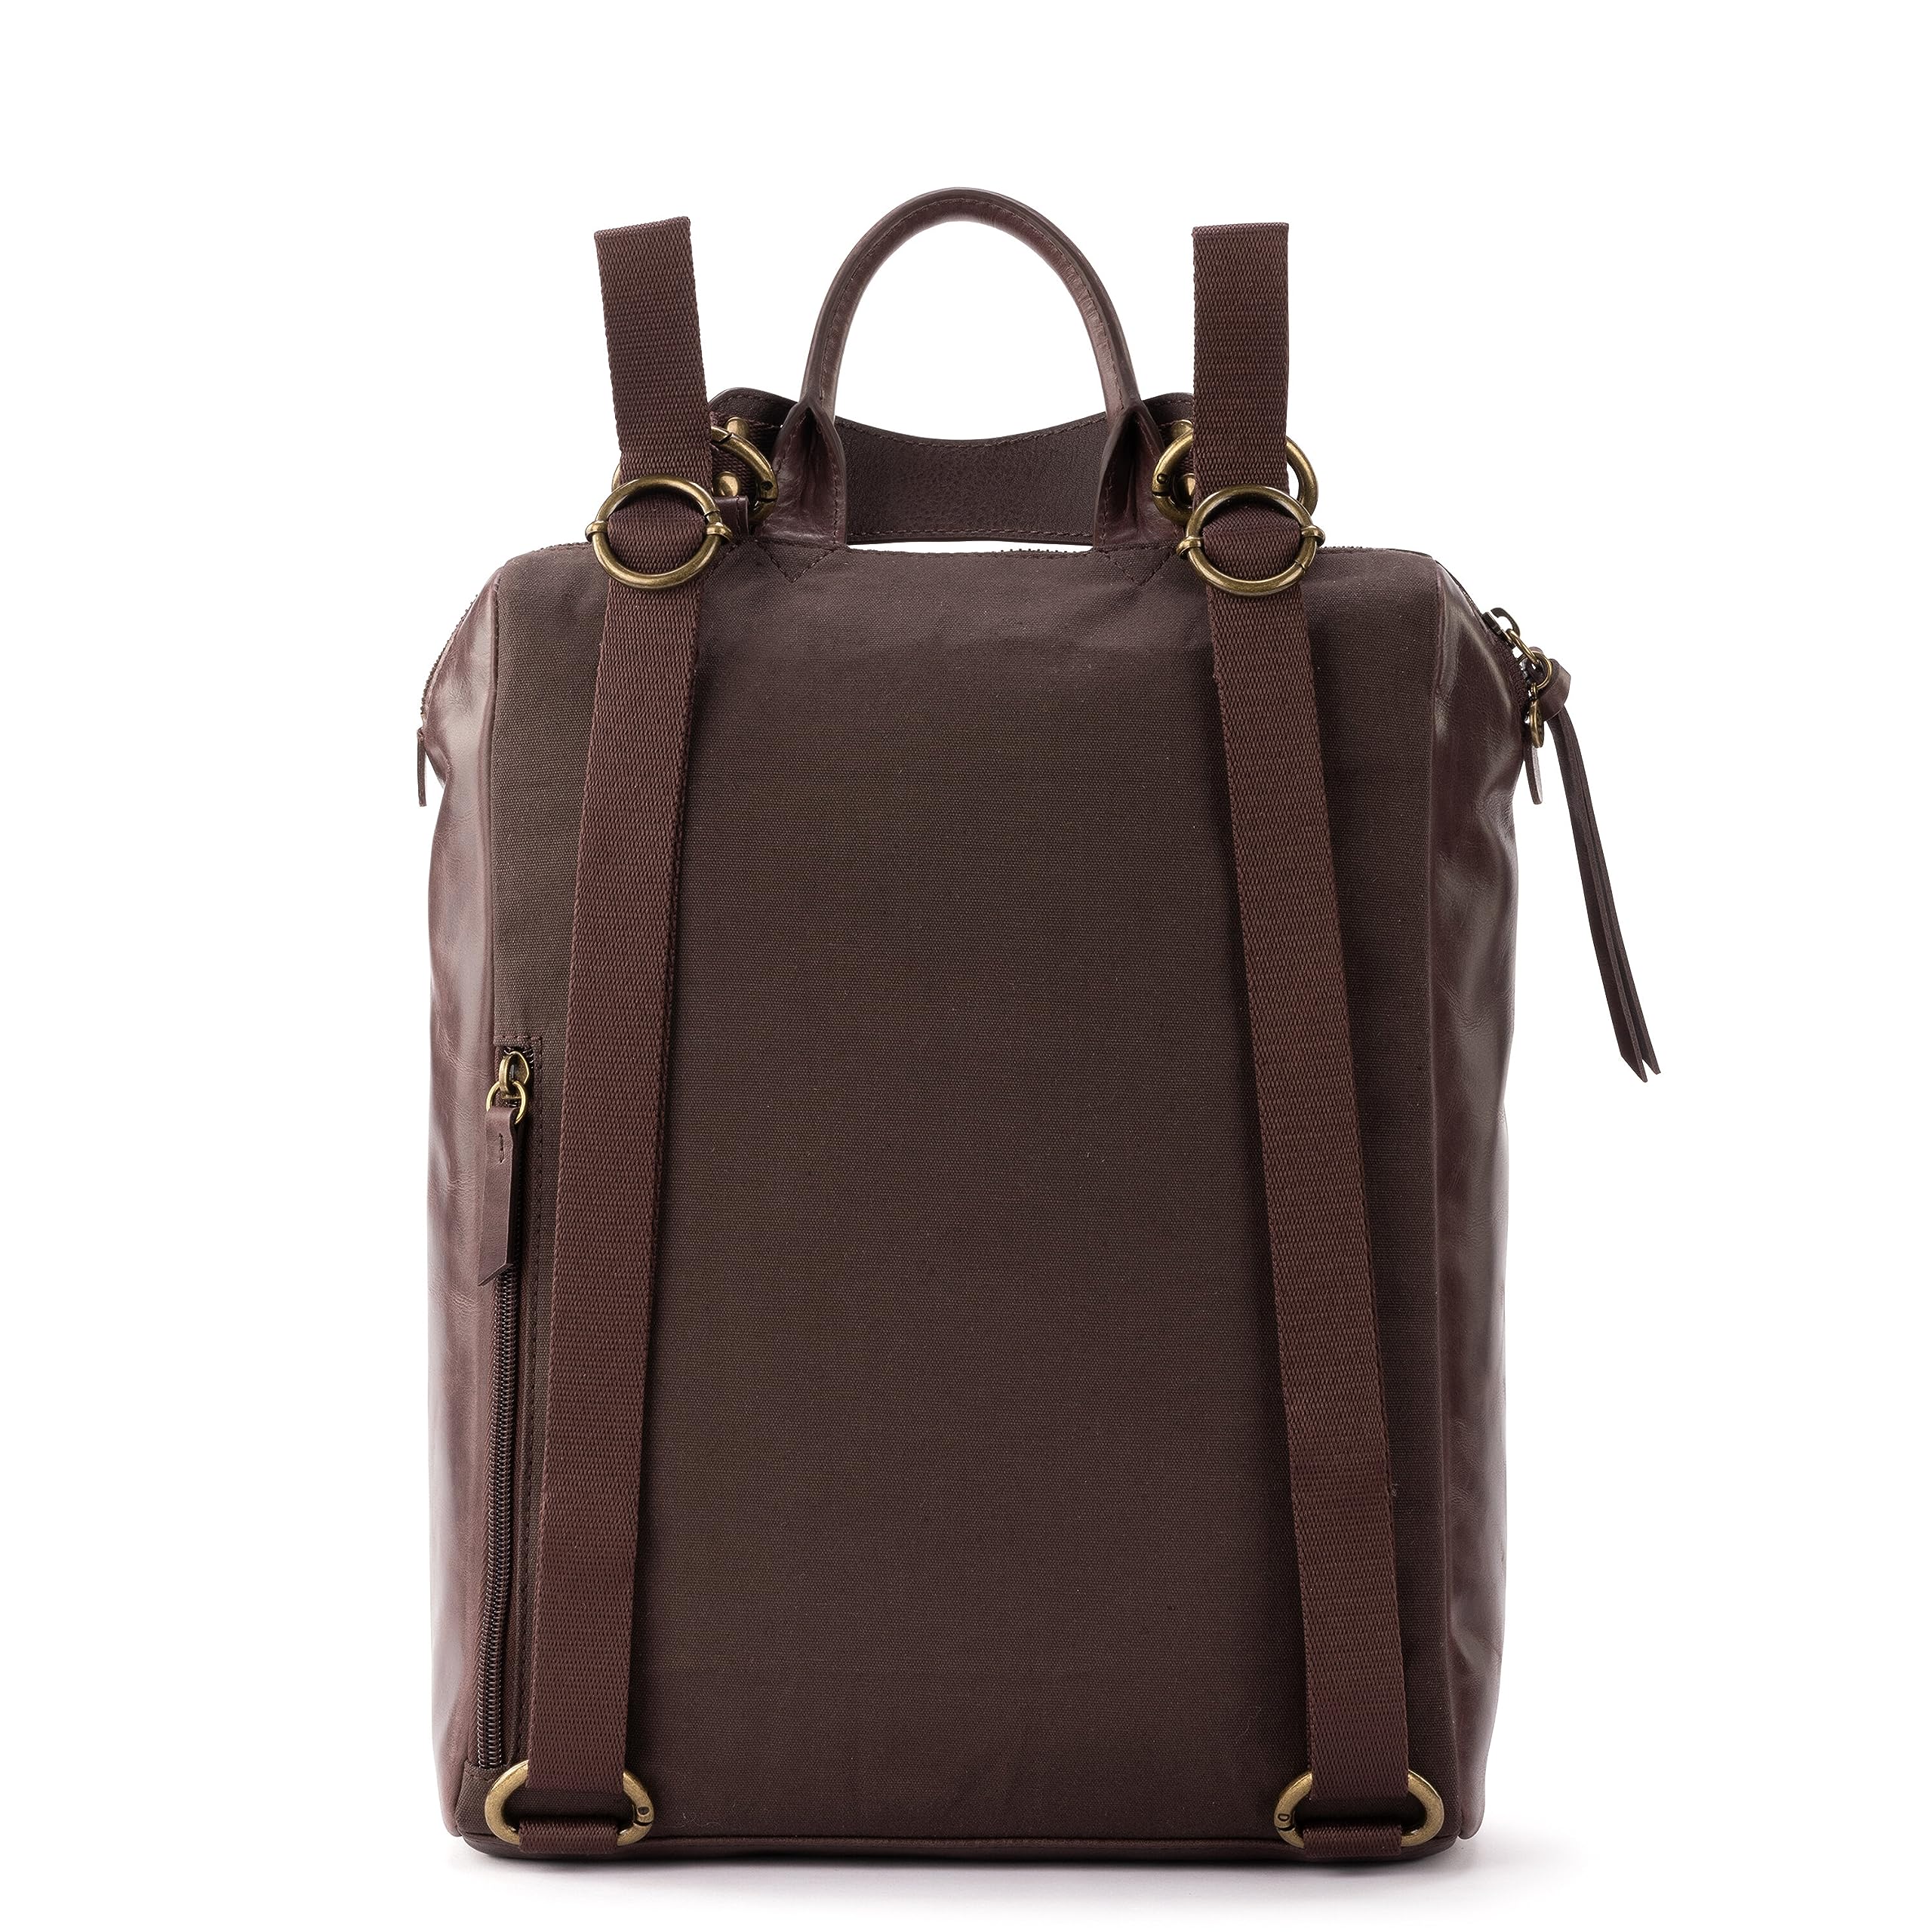 The Sak Loyola Convertible Backpack in Leather, Adjustable Convertible Strap, Mahogany Tile Emboss